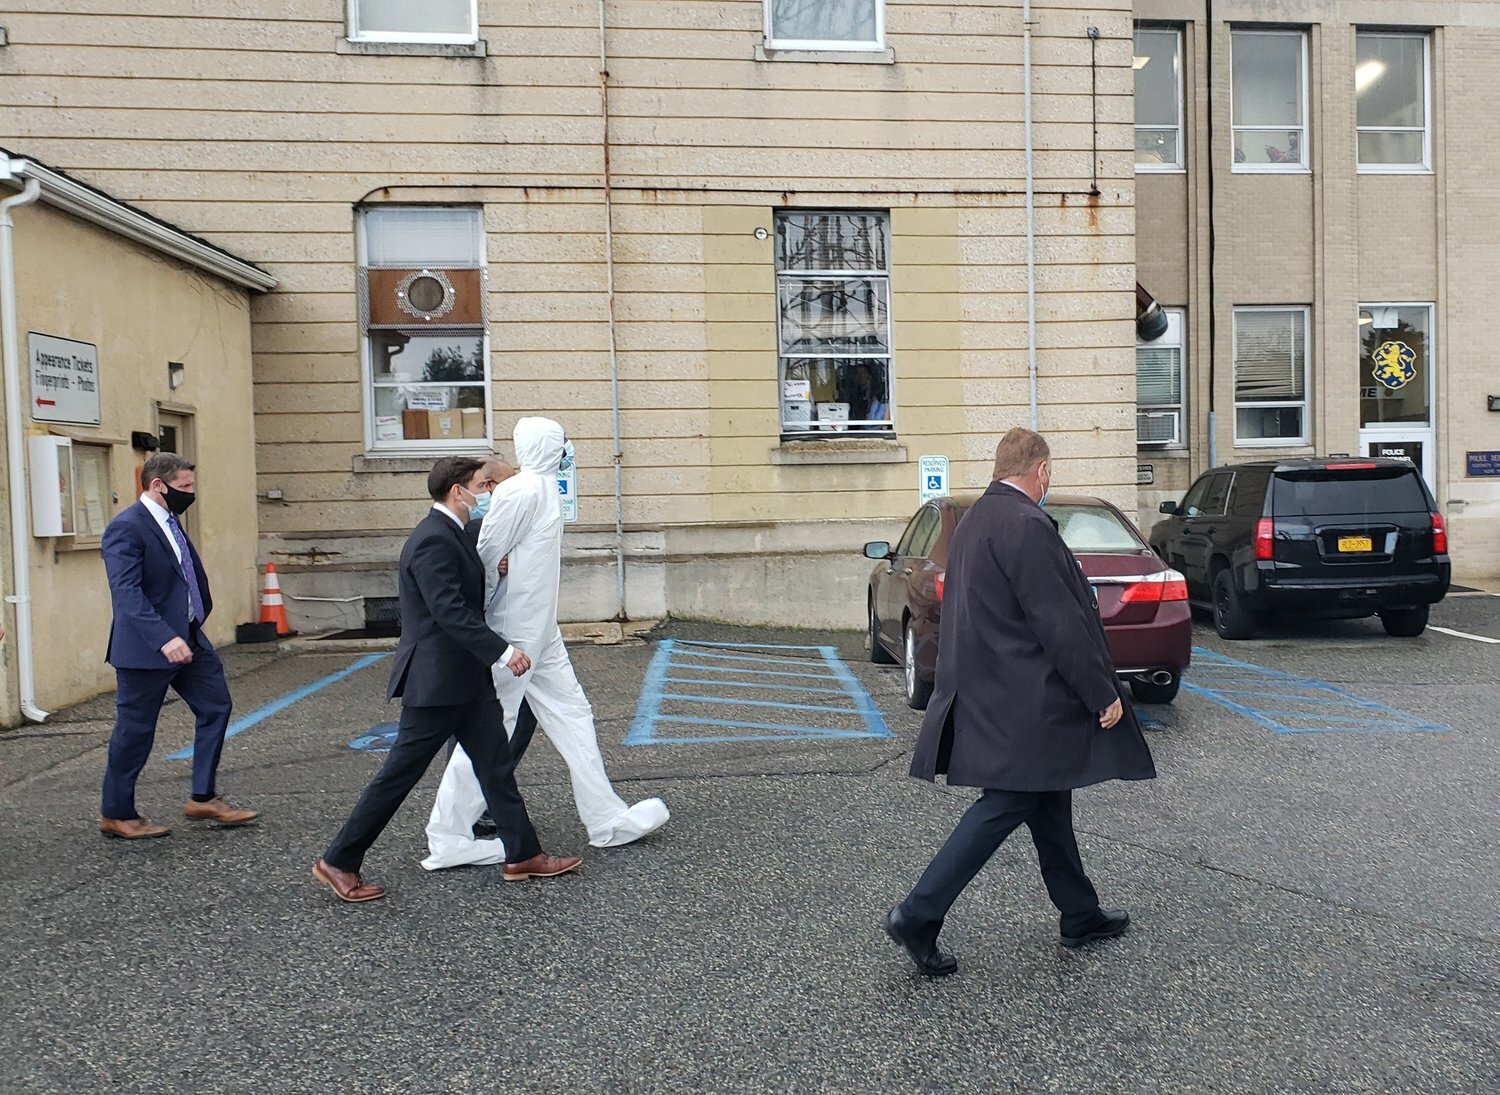 Gabriel DeWitt Wilson, here being escorted into court in 2021 wearing a while medical suit, was sentenced to 50 years to life for the murder of West Hempstead Stop & Shop manager Ray Wishropp, and the attempted murder of two other managers. Wilson worked in the store at the time, but wasn't scheduled to work on April 20, 2021, when the shooting occurred.